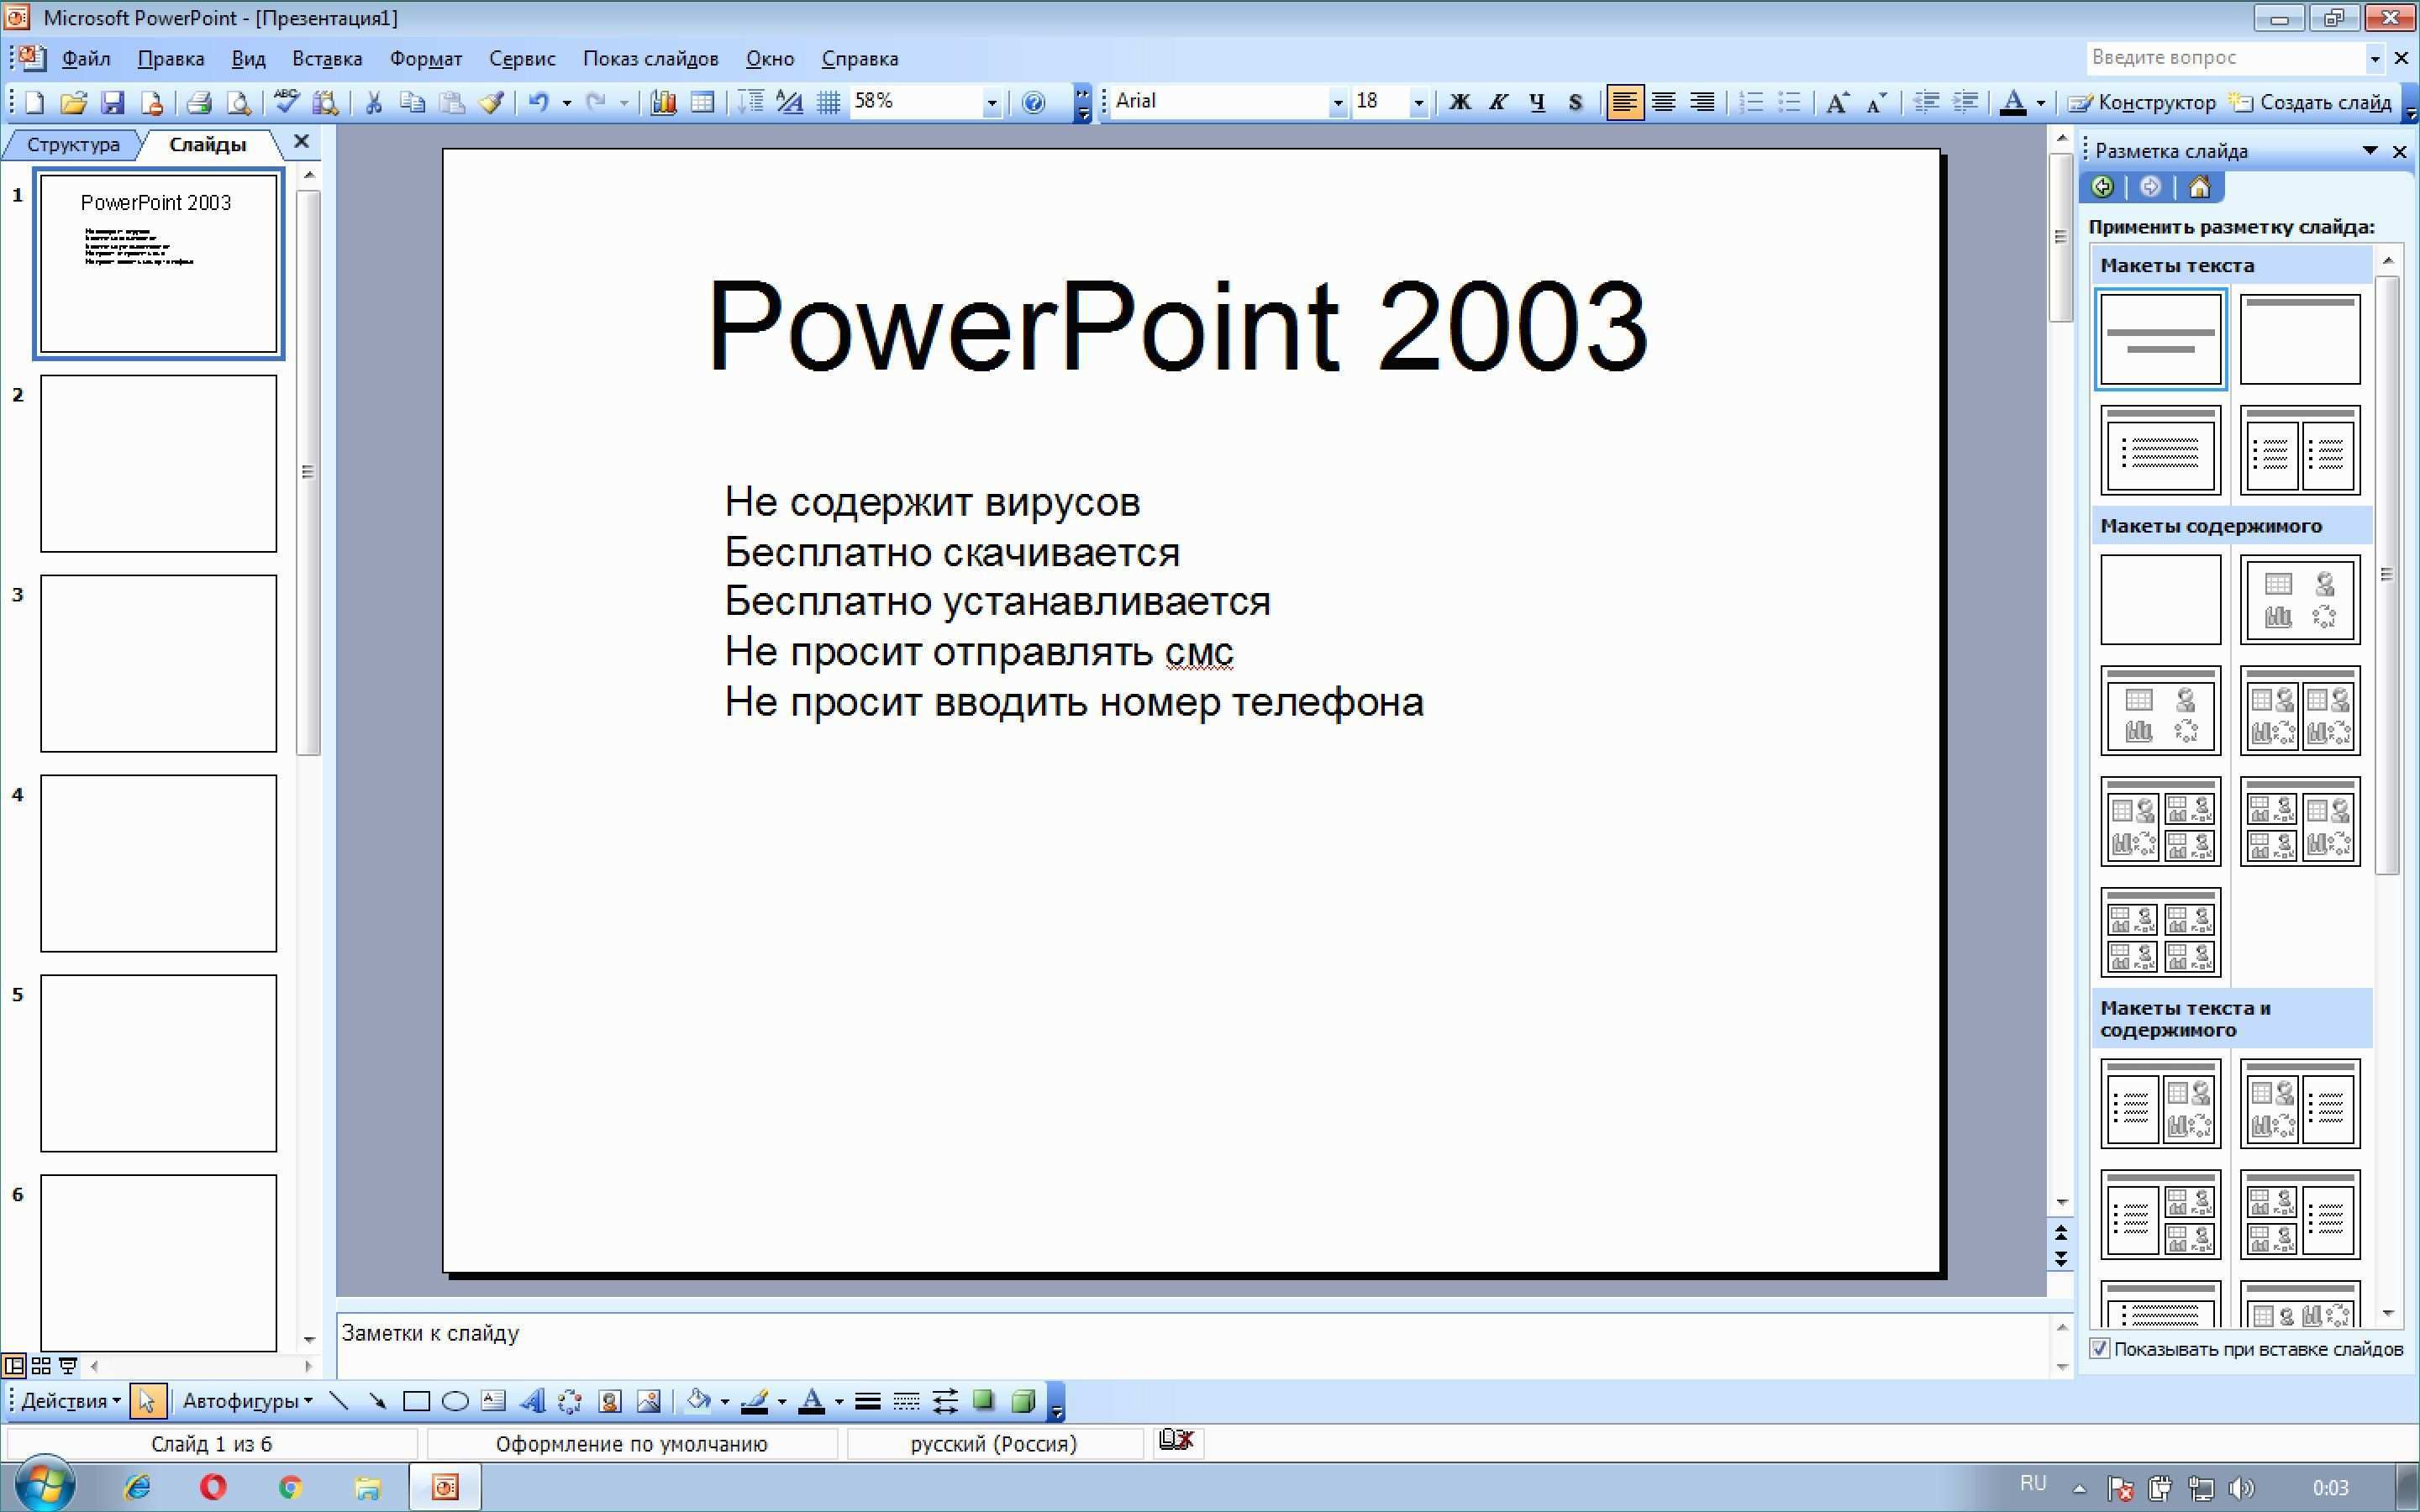 Free Download Templates For Microsoft Powerpoint 2003 Is Just One Of The Very Best Themes We Powerpoint Powerpoint Timeline Template Free Microsoft Powerpoint